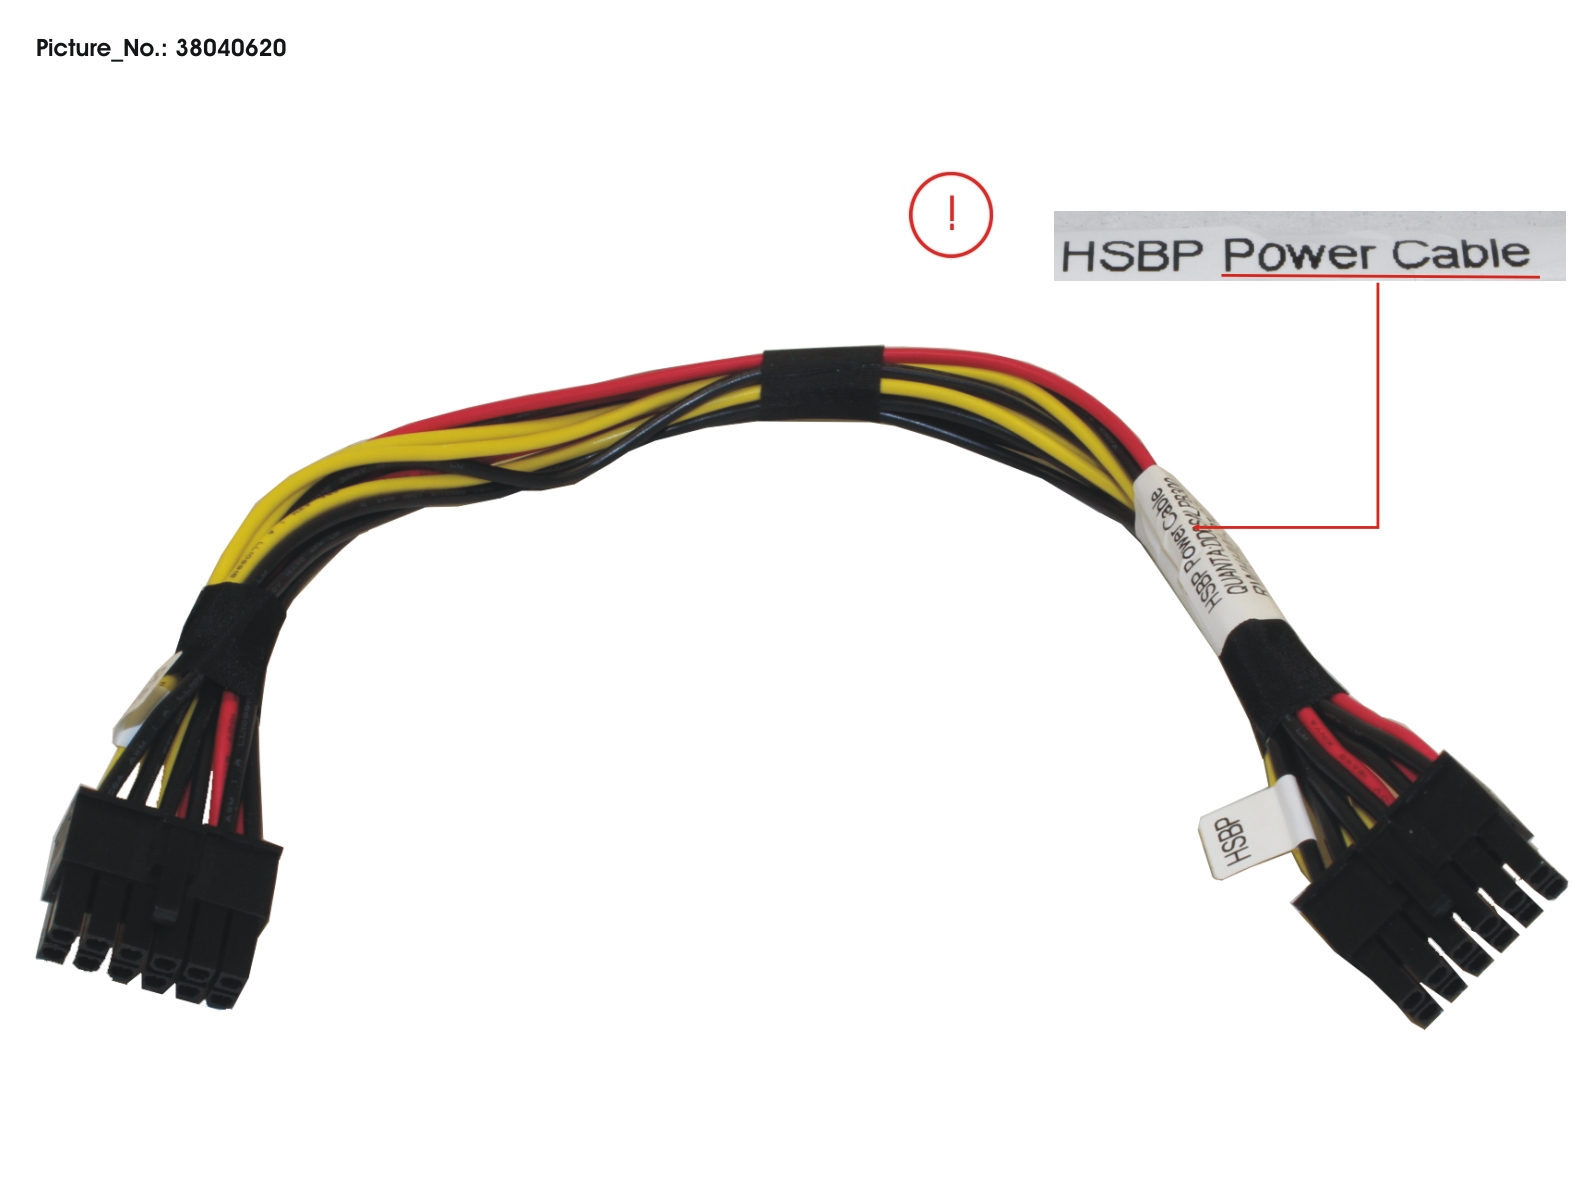 CBL HDD BOARD POWER CABLE